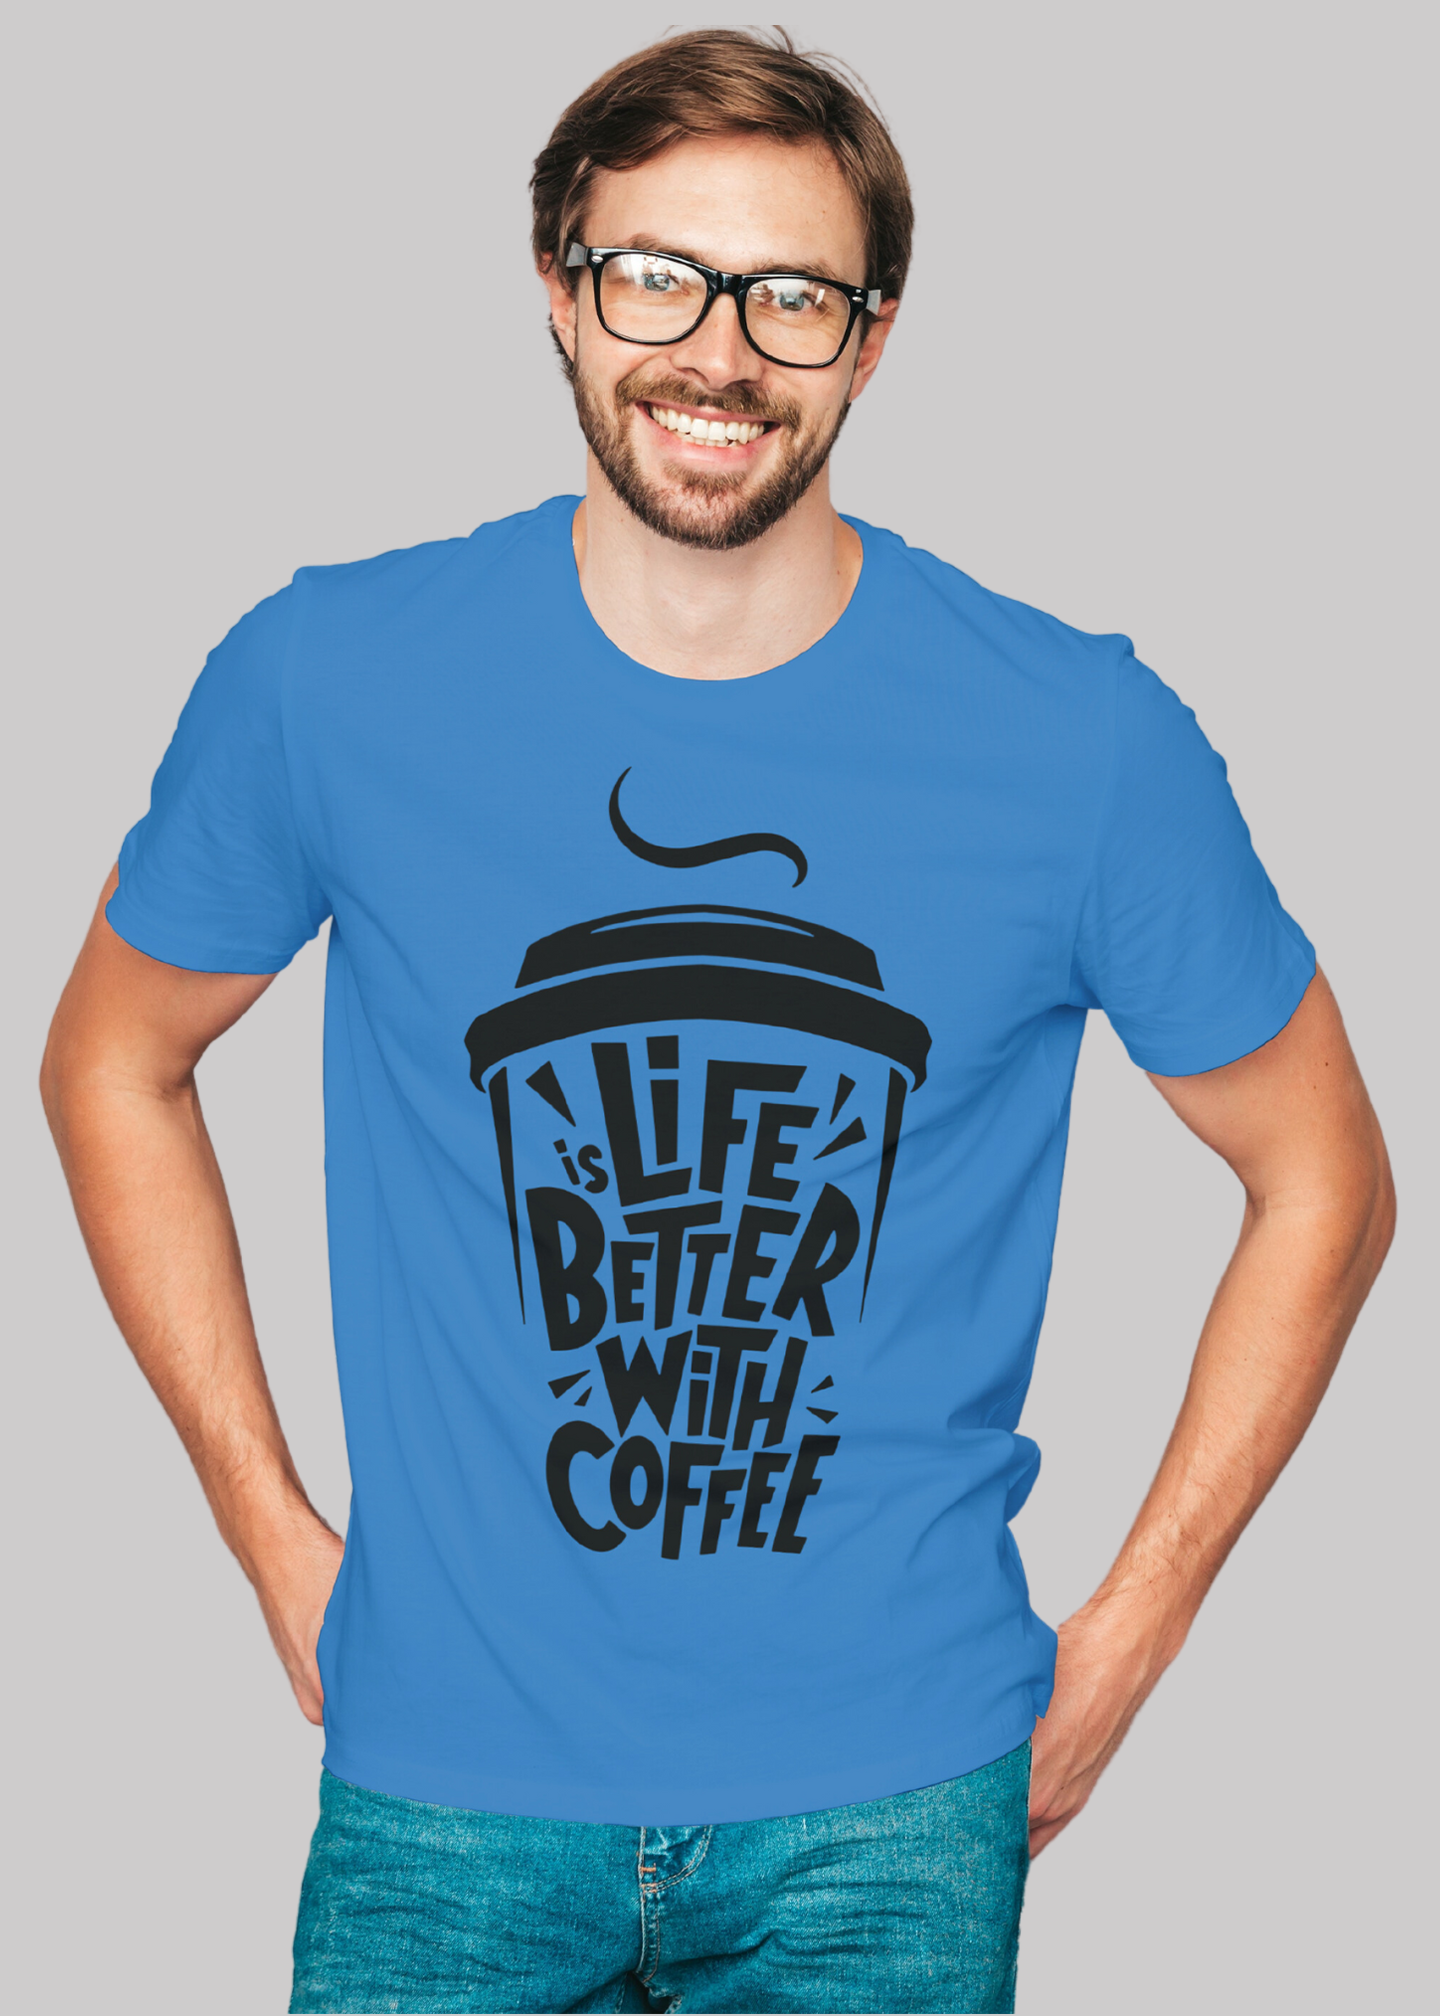 Life is better with coffee Printed Half Sleeve Premium Cotton T-shirt For Men